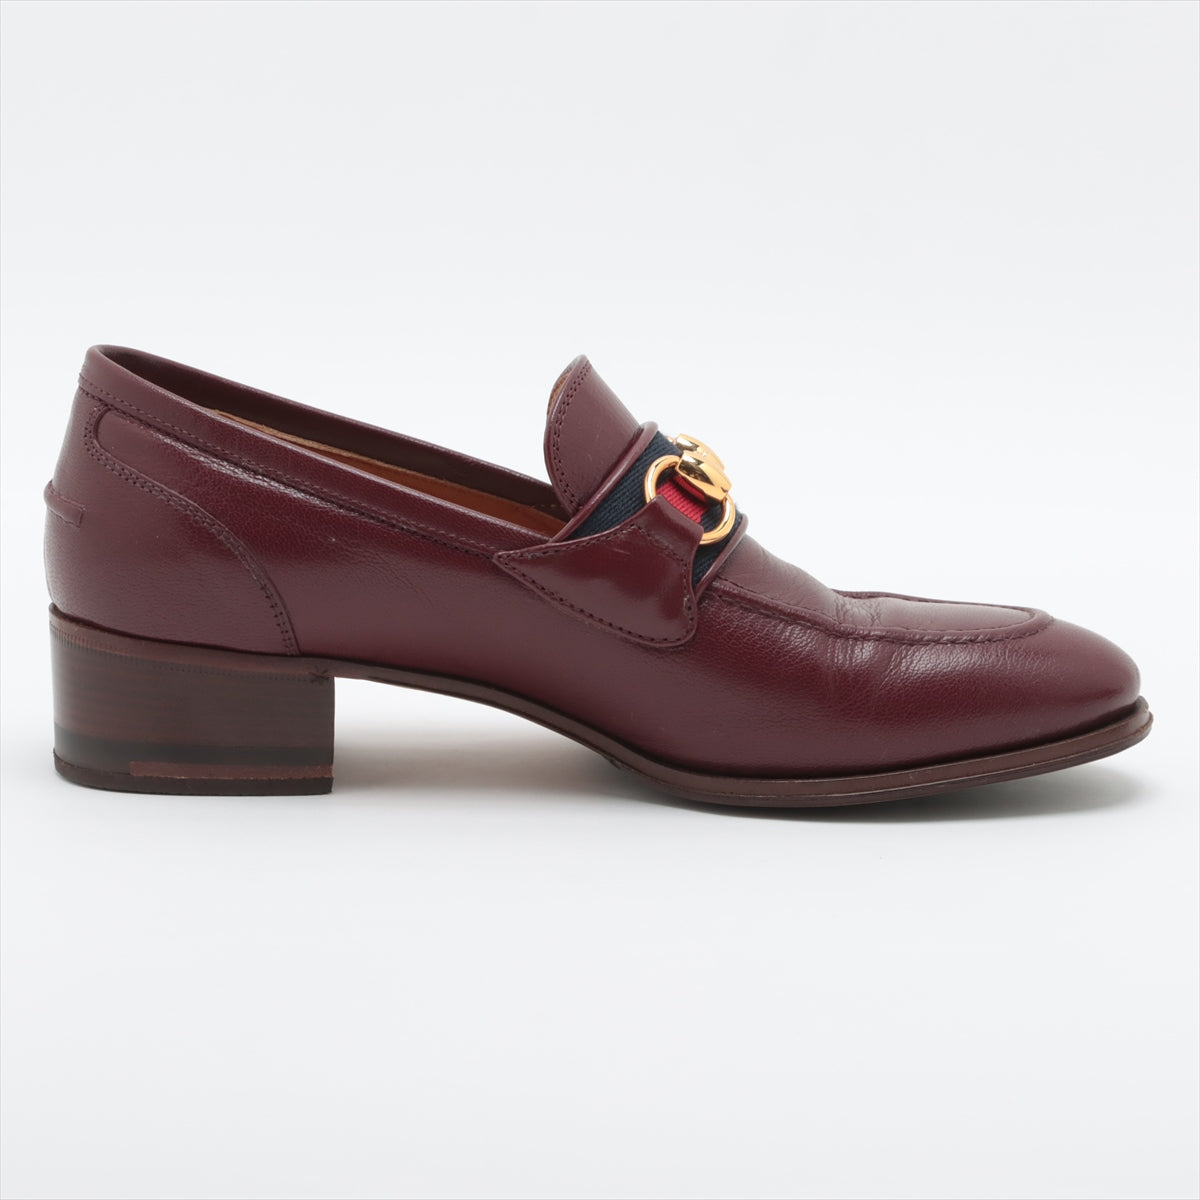 Gucci Horsebit Leather Loafer EU36 Ladies' Bordeaux 660819 Sherry Line Lift repair box There is a bag